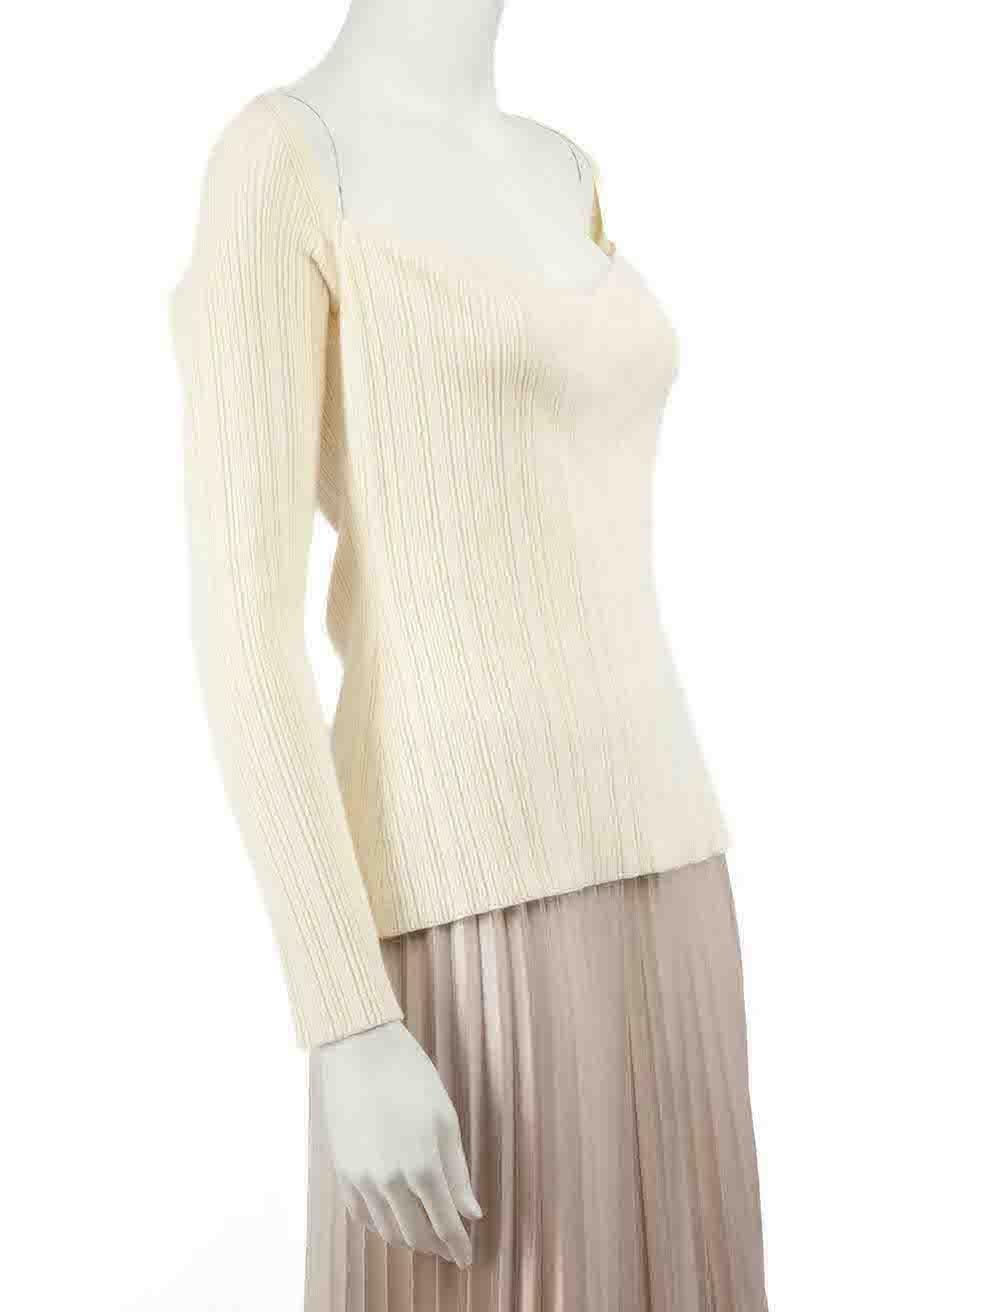 CONDITION is Never worn, with tags. No visible wear to top is evident on this new ANNA QUAN designer resale item.
 
 Details
 Ecru
 Cotton
 Top
 Rib knit
 Sweetheart neckline
 Stretchy
 Figure hugging fit
 
 
 Made in China
 
 Composition
 88%